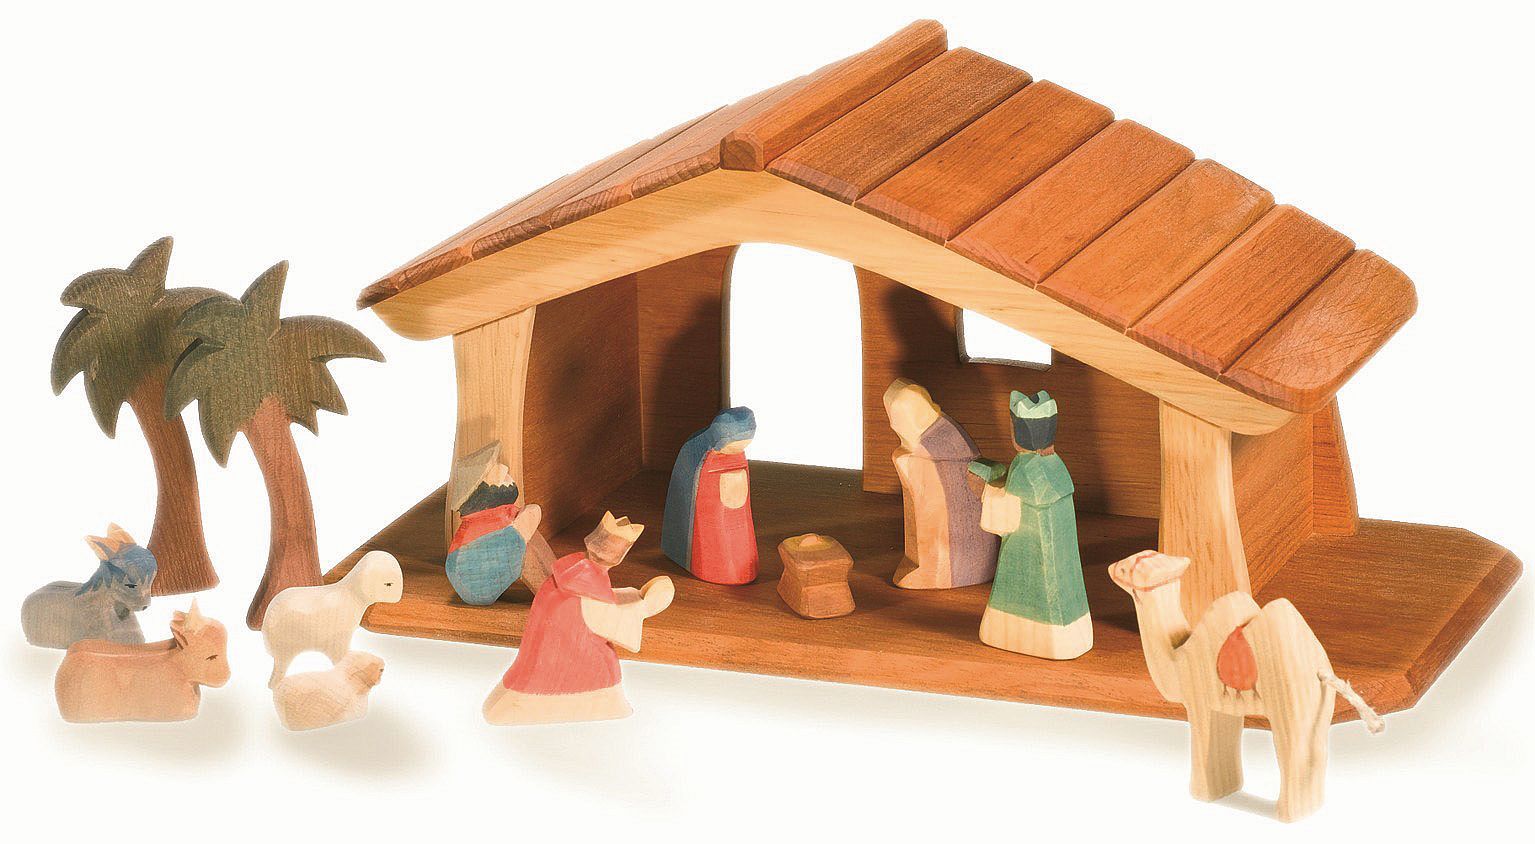 Ostheimer Holy Family - 5 pieces (66510)